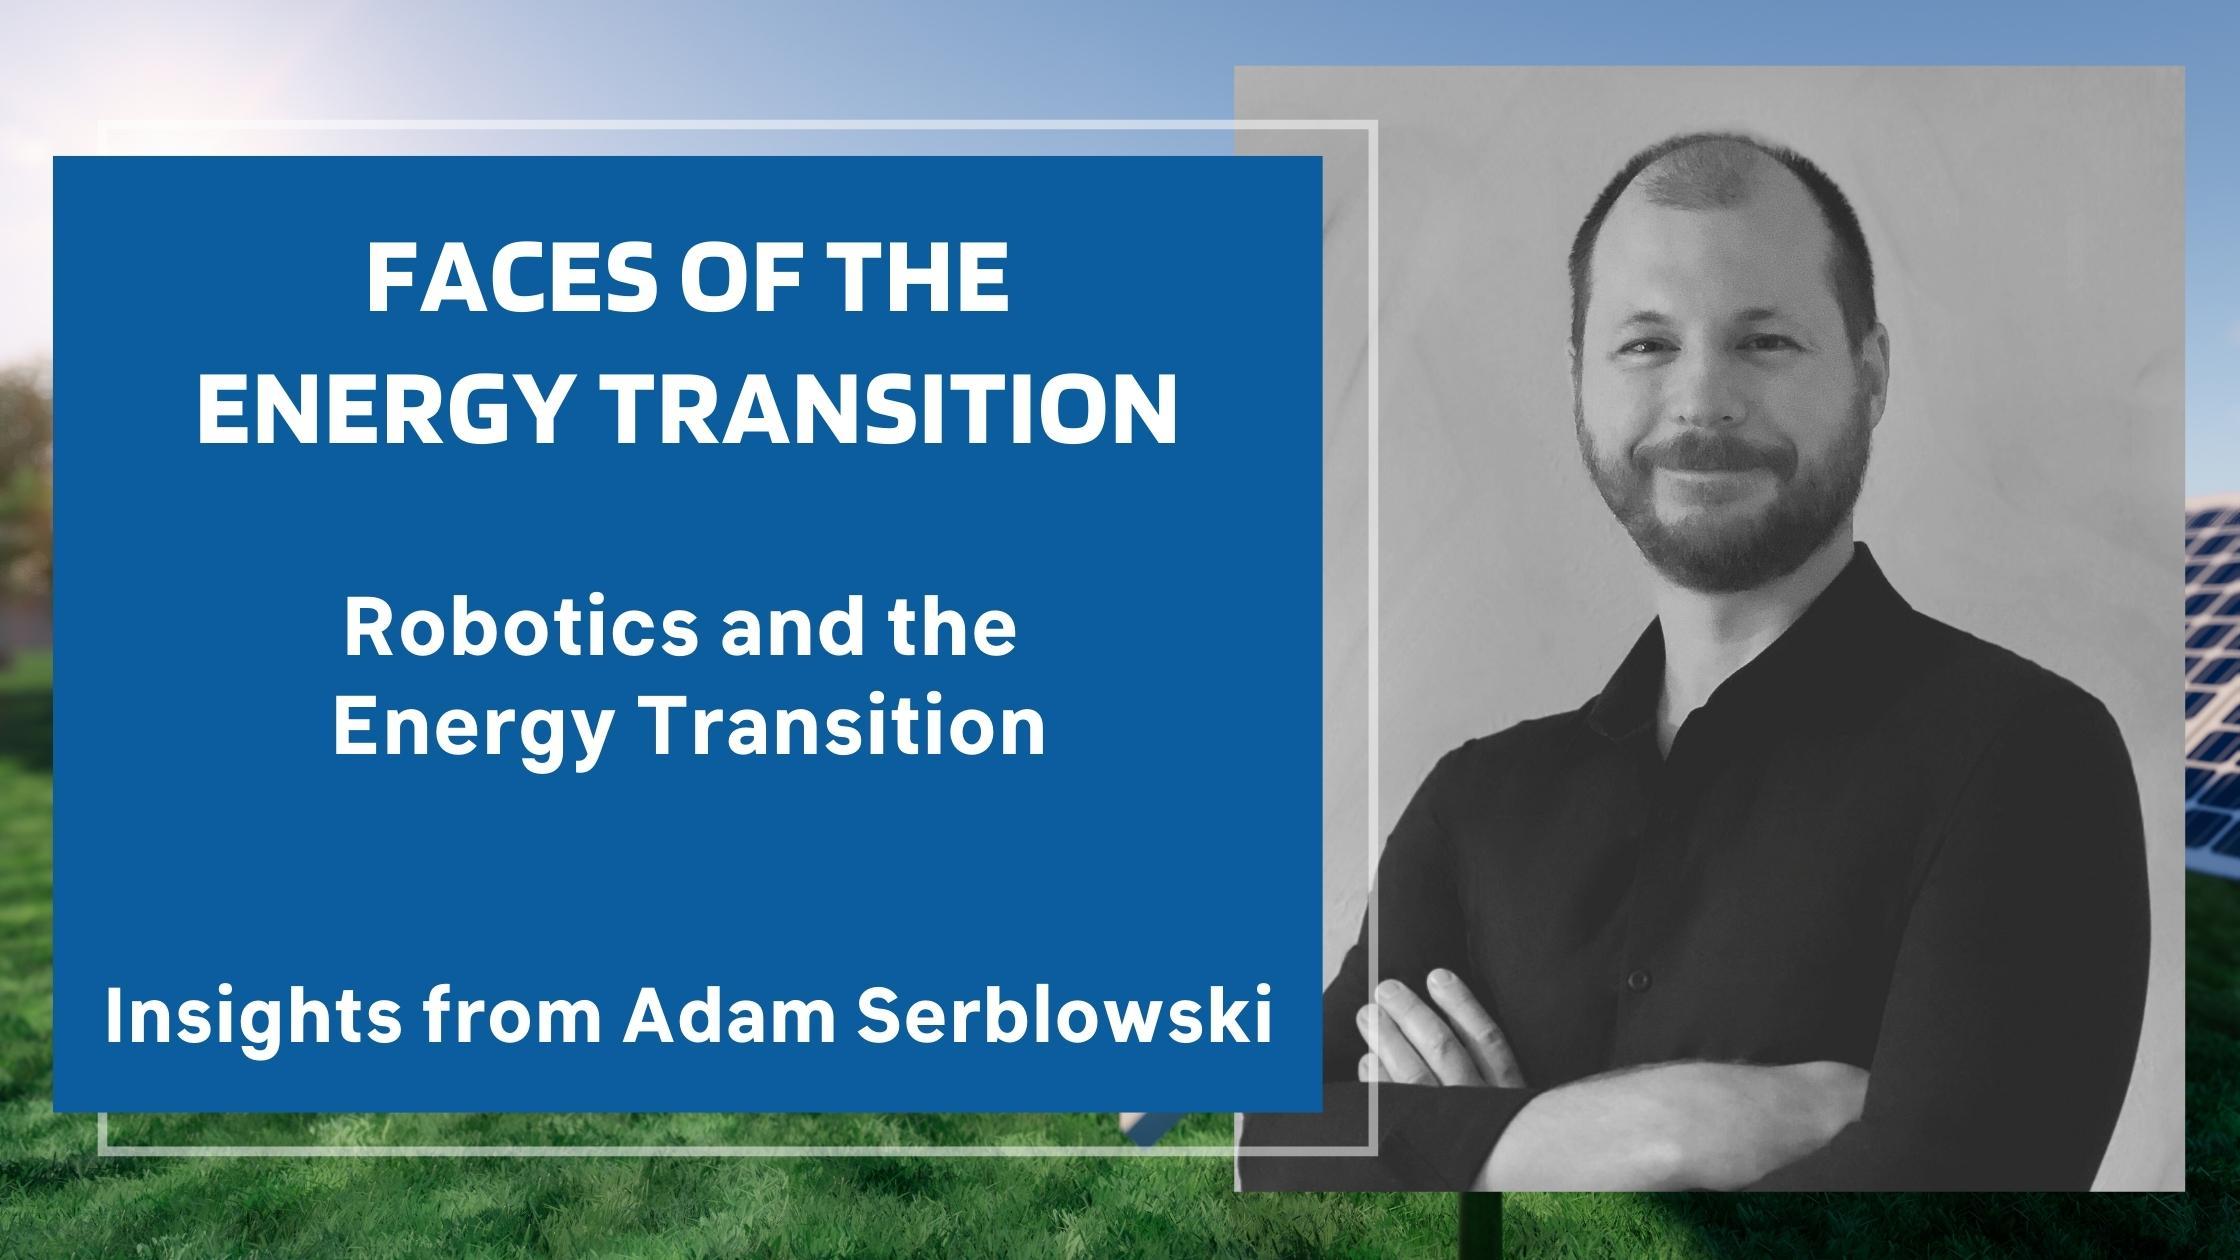 Robotics and the Energy Transition